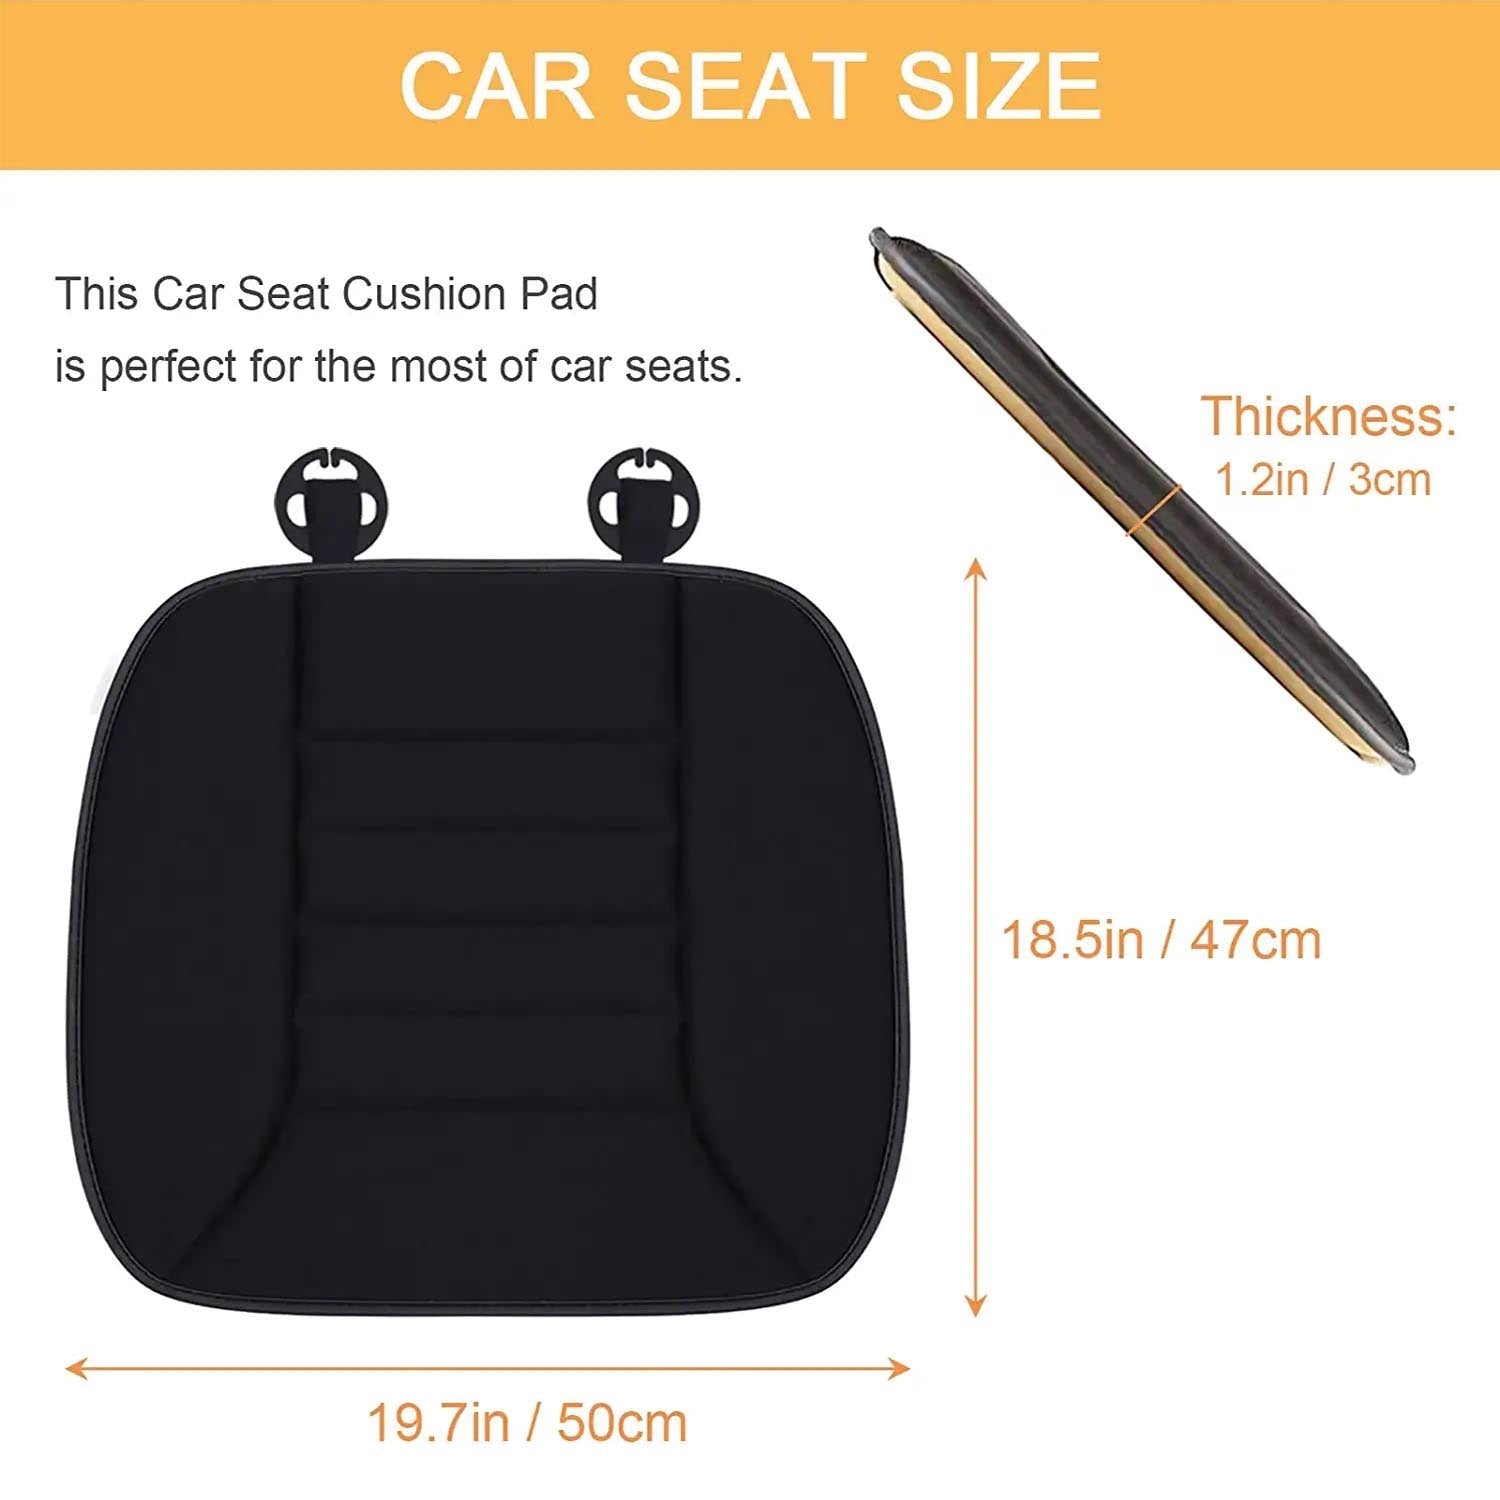 Car Seat Cushion with 1.2inch Comfort Memory Foam, Custom Logo For Your Cars, Seat Cushion for Car and Office Chair WQ19989 - Delicate Leather